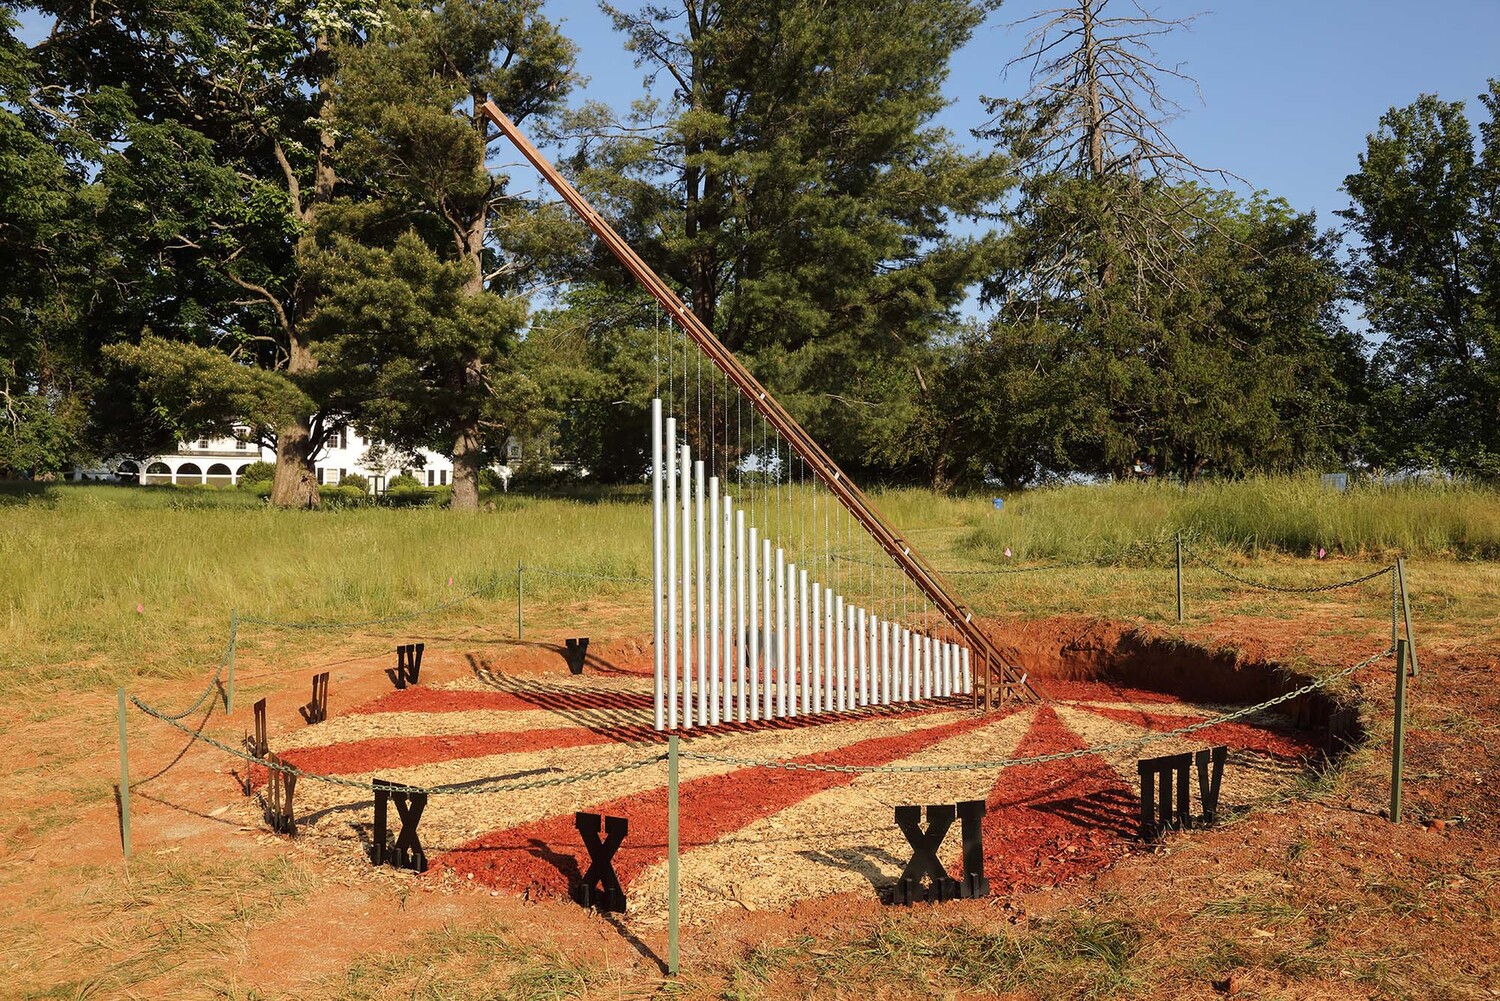 Parker Pearce (College &apos;23), Singing Sundial, 2021, mixed media installation. Photo by Tom Cogill.